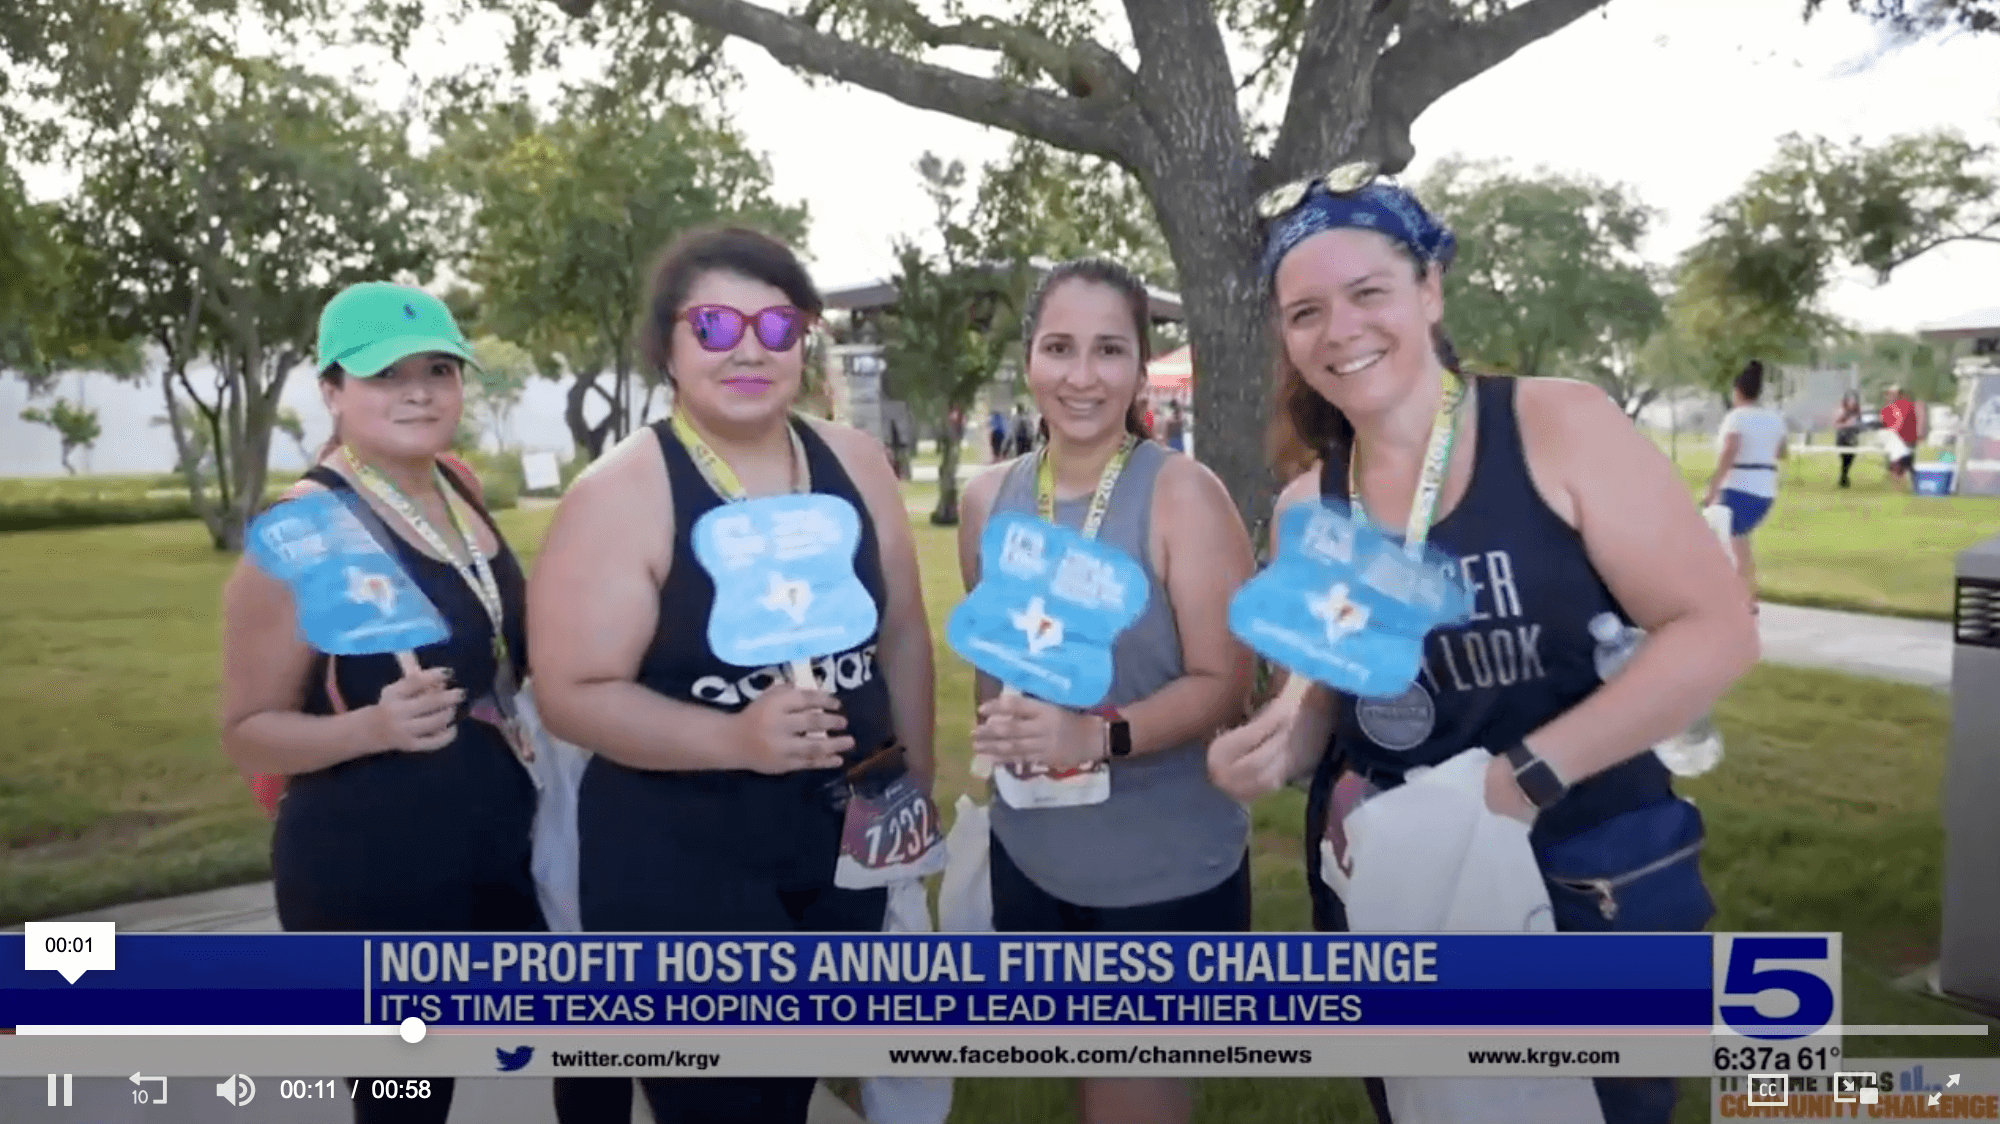 Featured image for “Non-profit hosting fitness challenge to empower Texans”